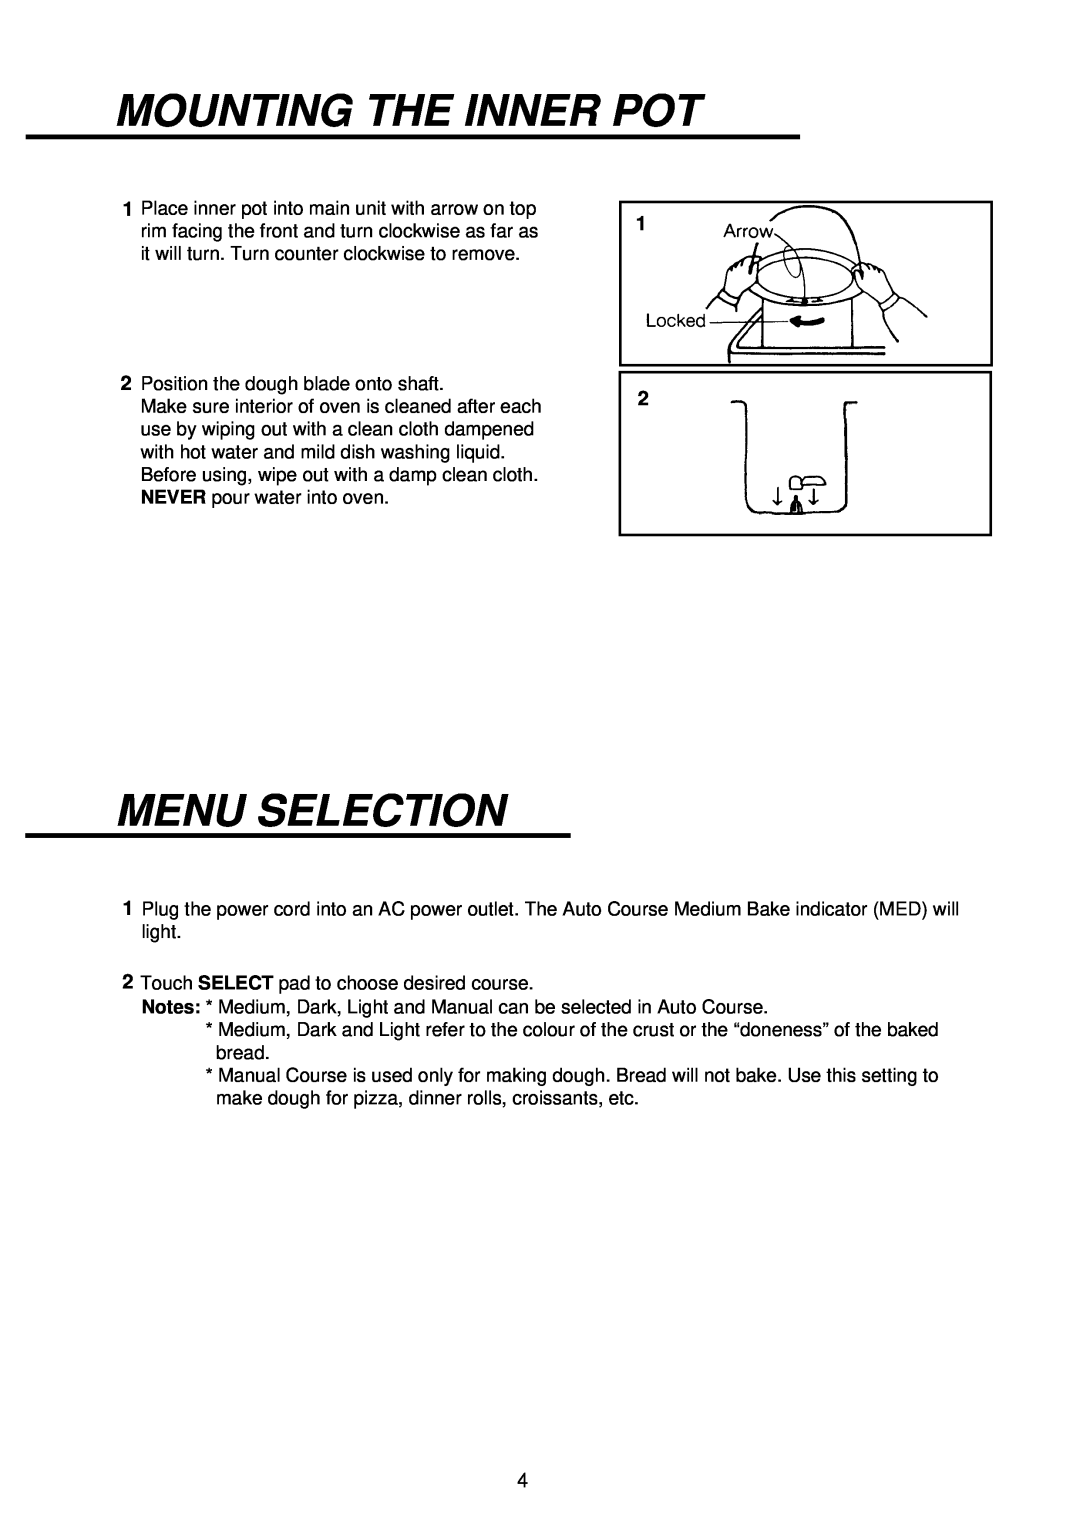 Palsonic PAB-3000 owner manual Mounting The Inner Pot, Menu Selection 